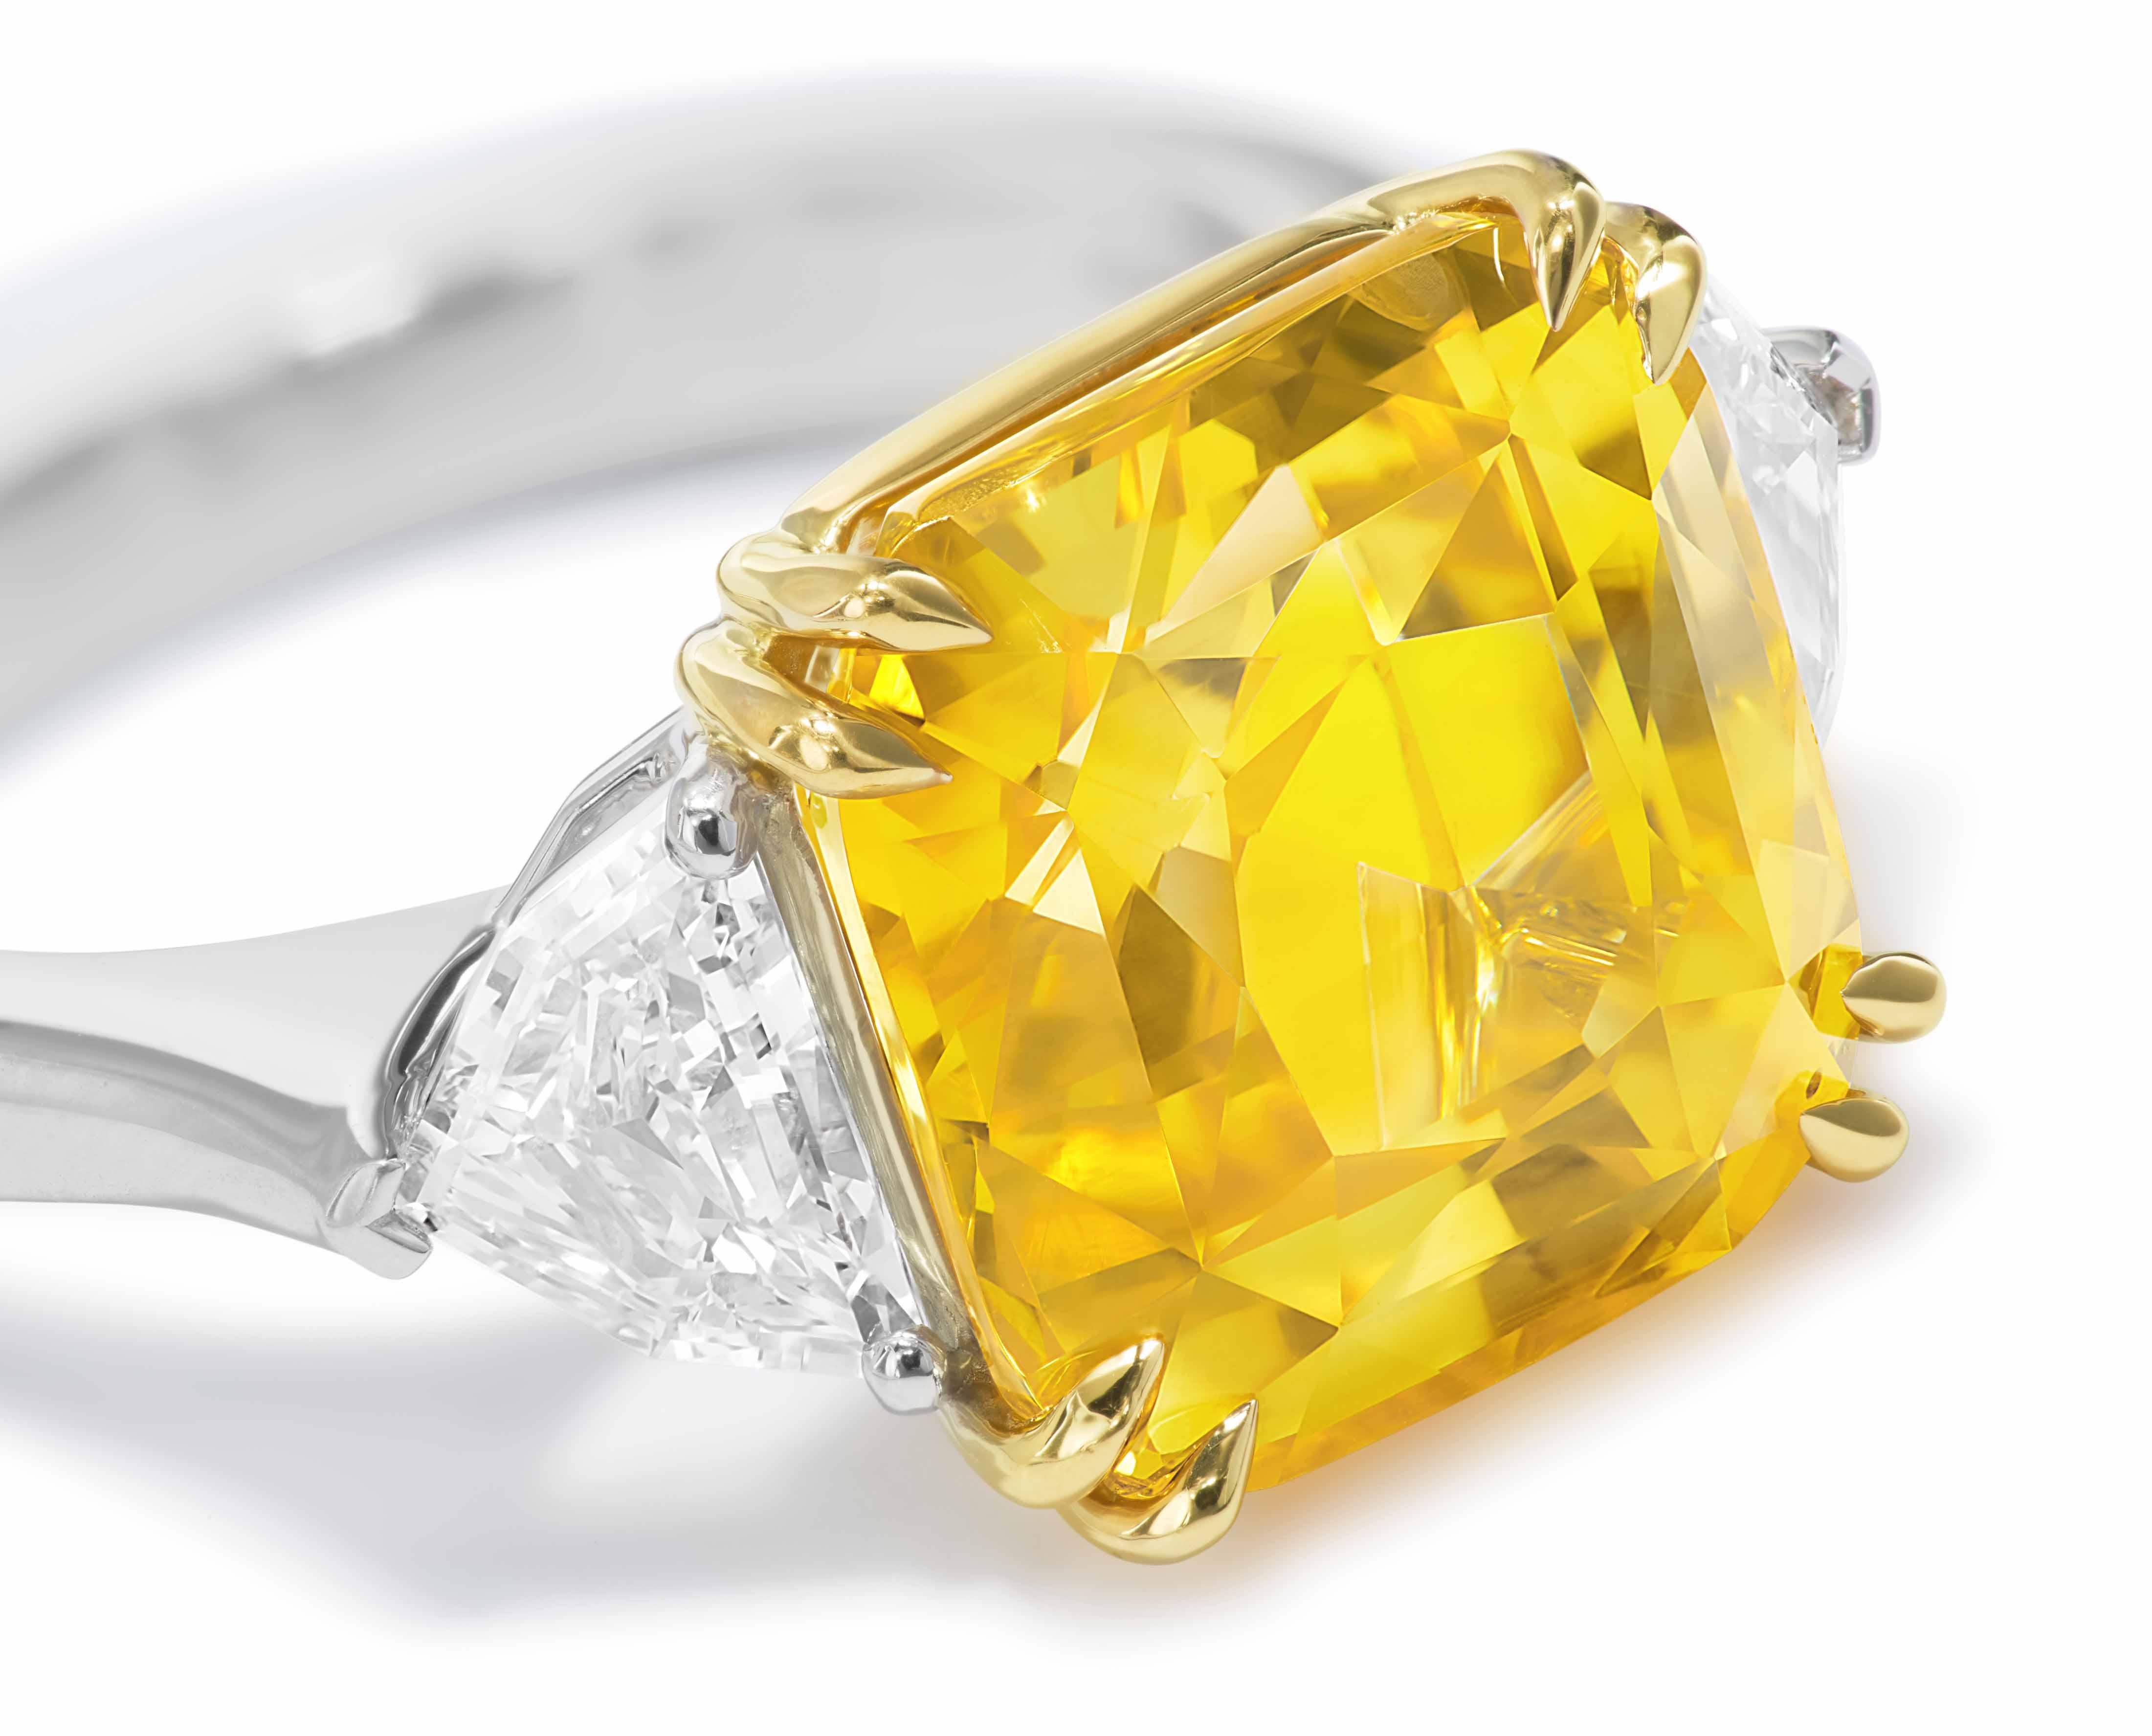 The main stone is a GIA certified 10.11 ct cushion-cut Yellow Sapphire from Sri Lanka. Side stones are GIA-certified collection-grade, epaulette-cut diamonds (0.50ct. D VVS1 and 0.51ct. E VVS1). The main stone is set in 18K yellow gold; the shank